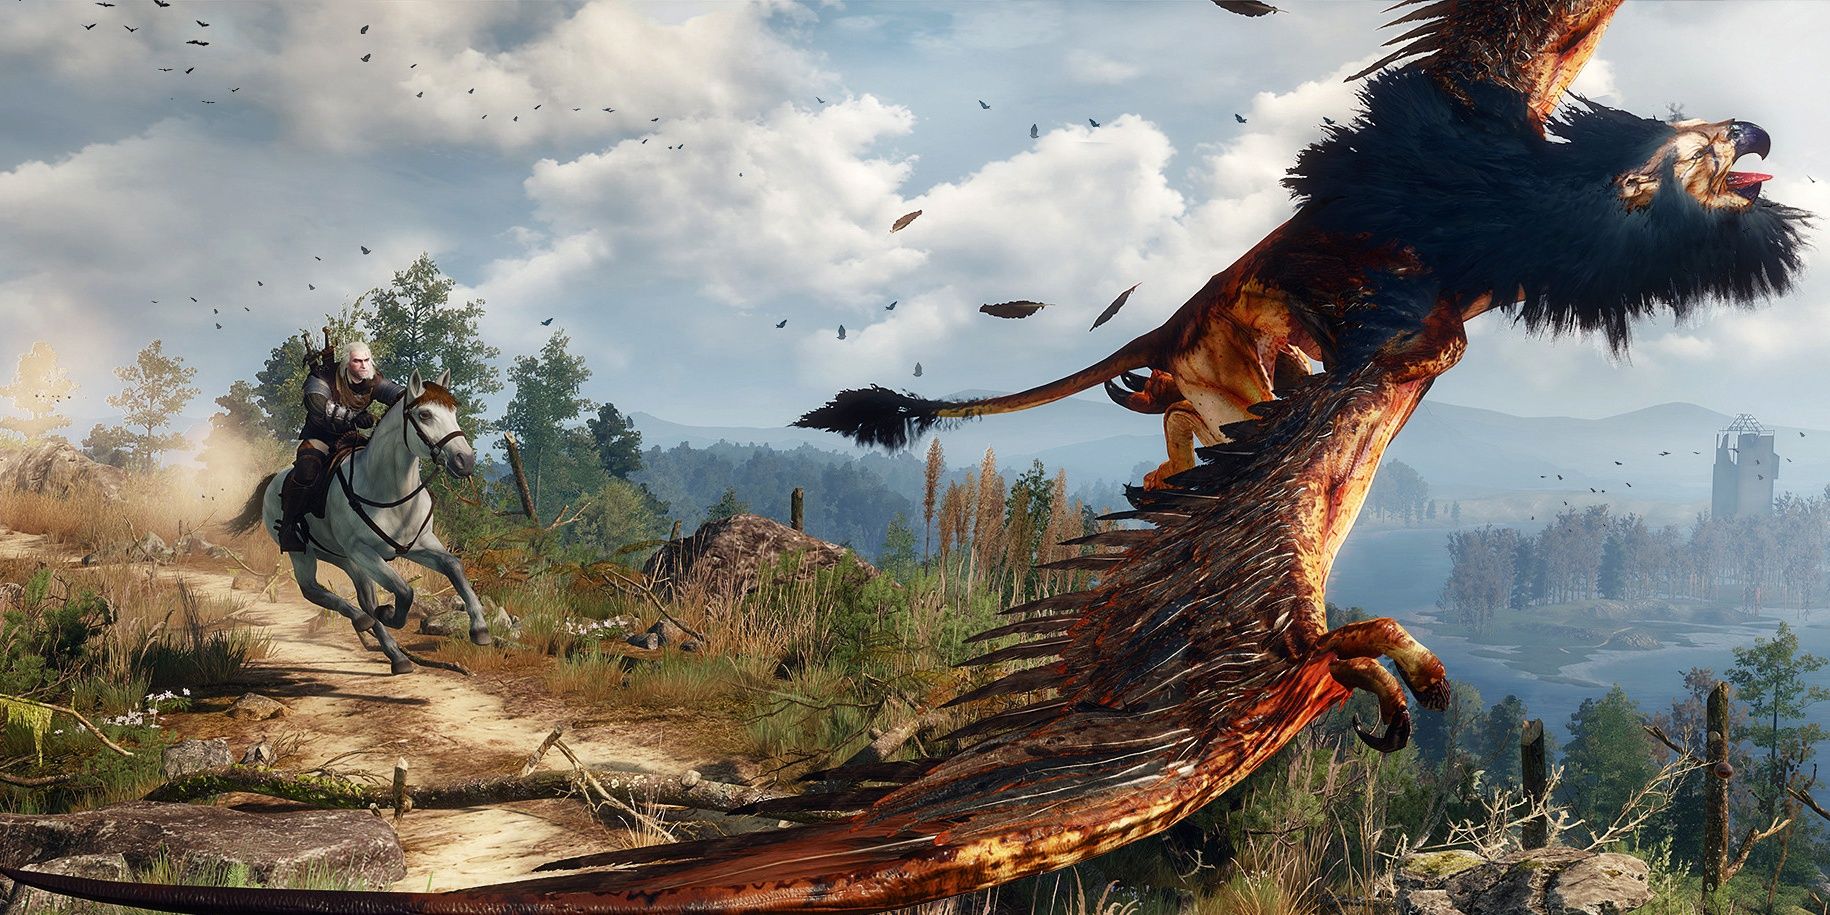 Geralt riding a horse chasing a flying monster in The Witcher 3: Wild Hunt